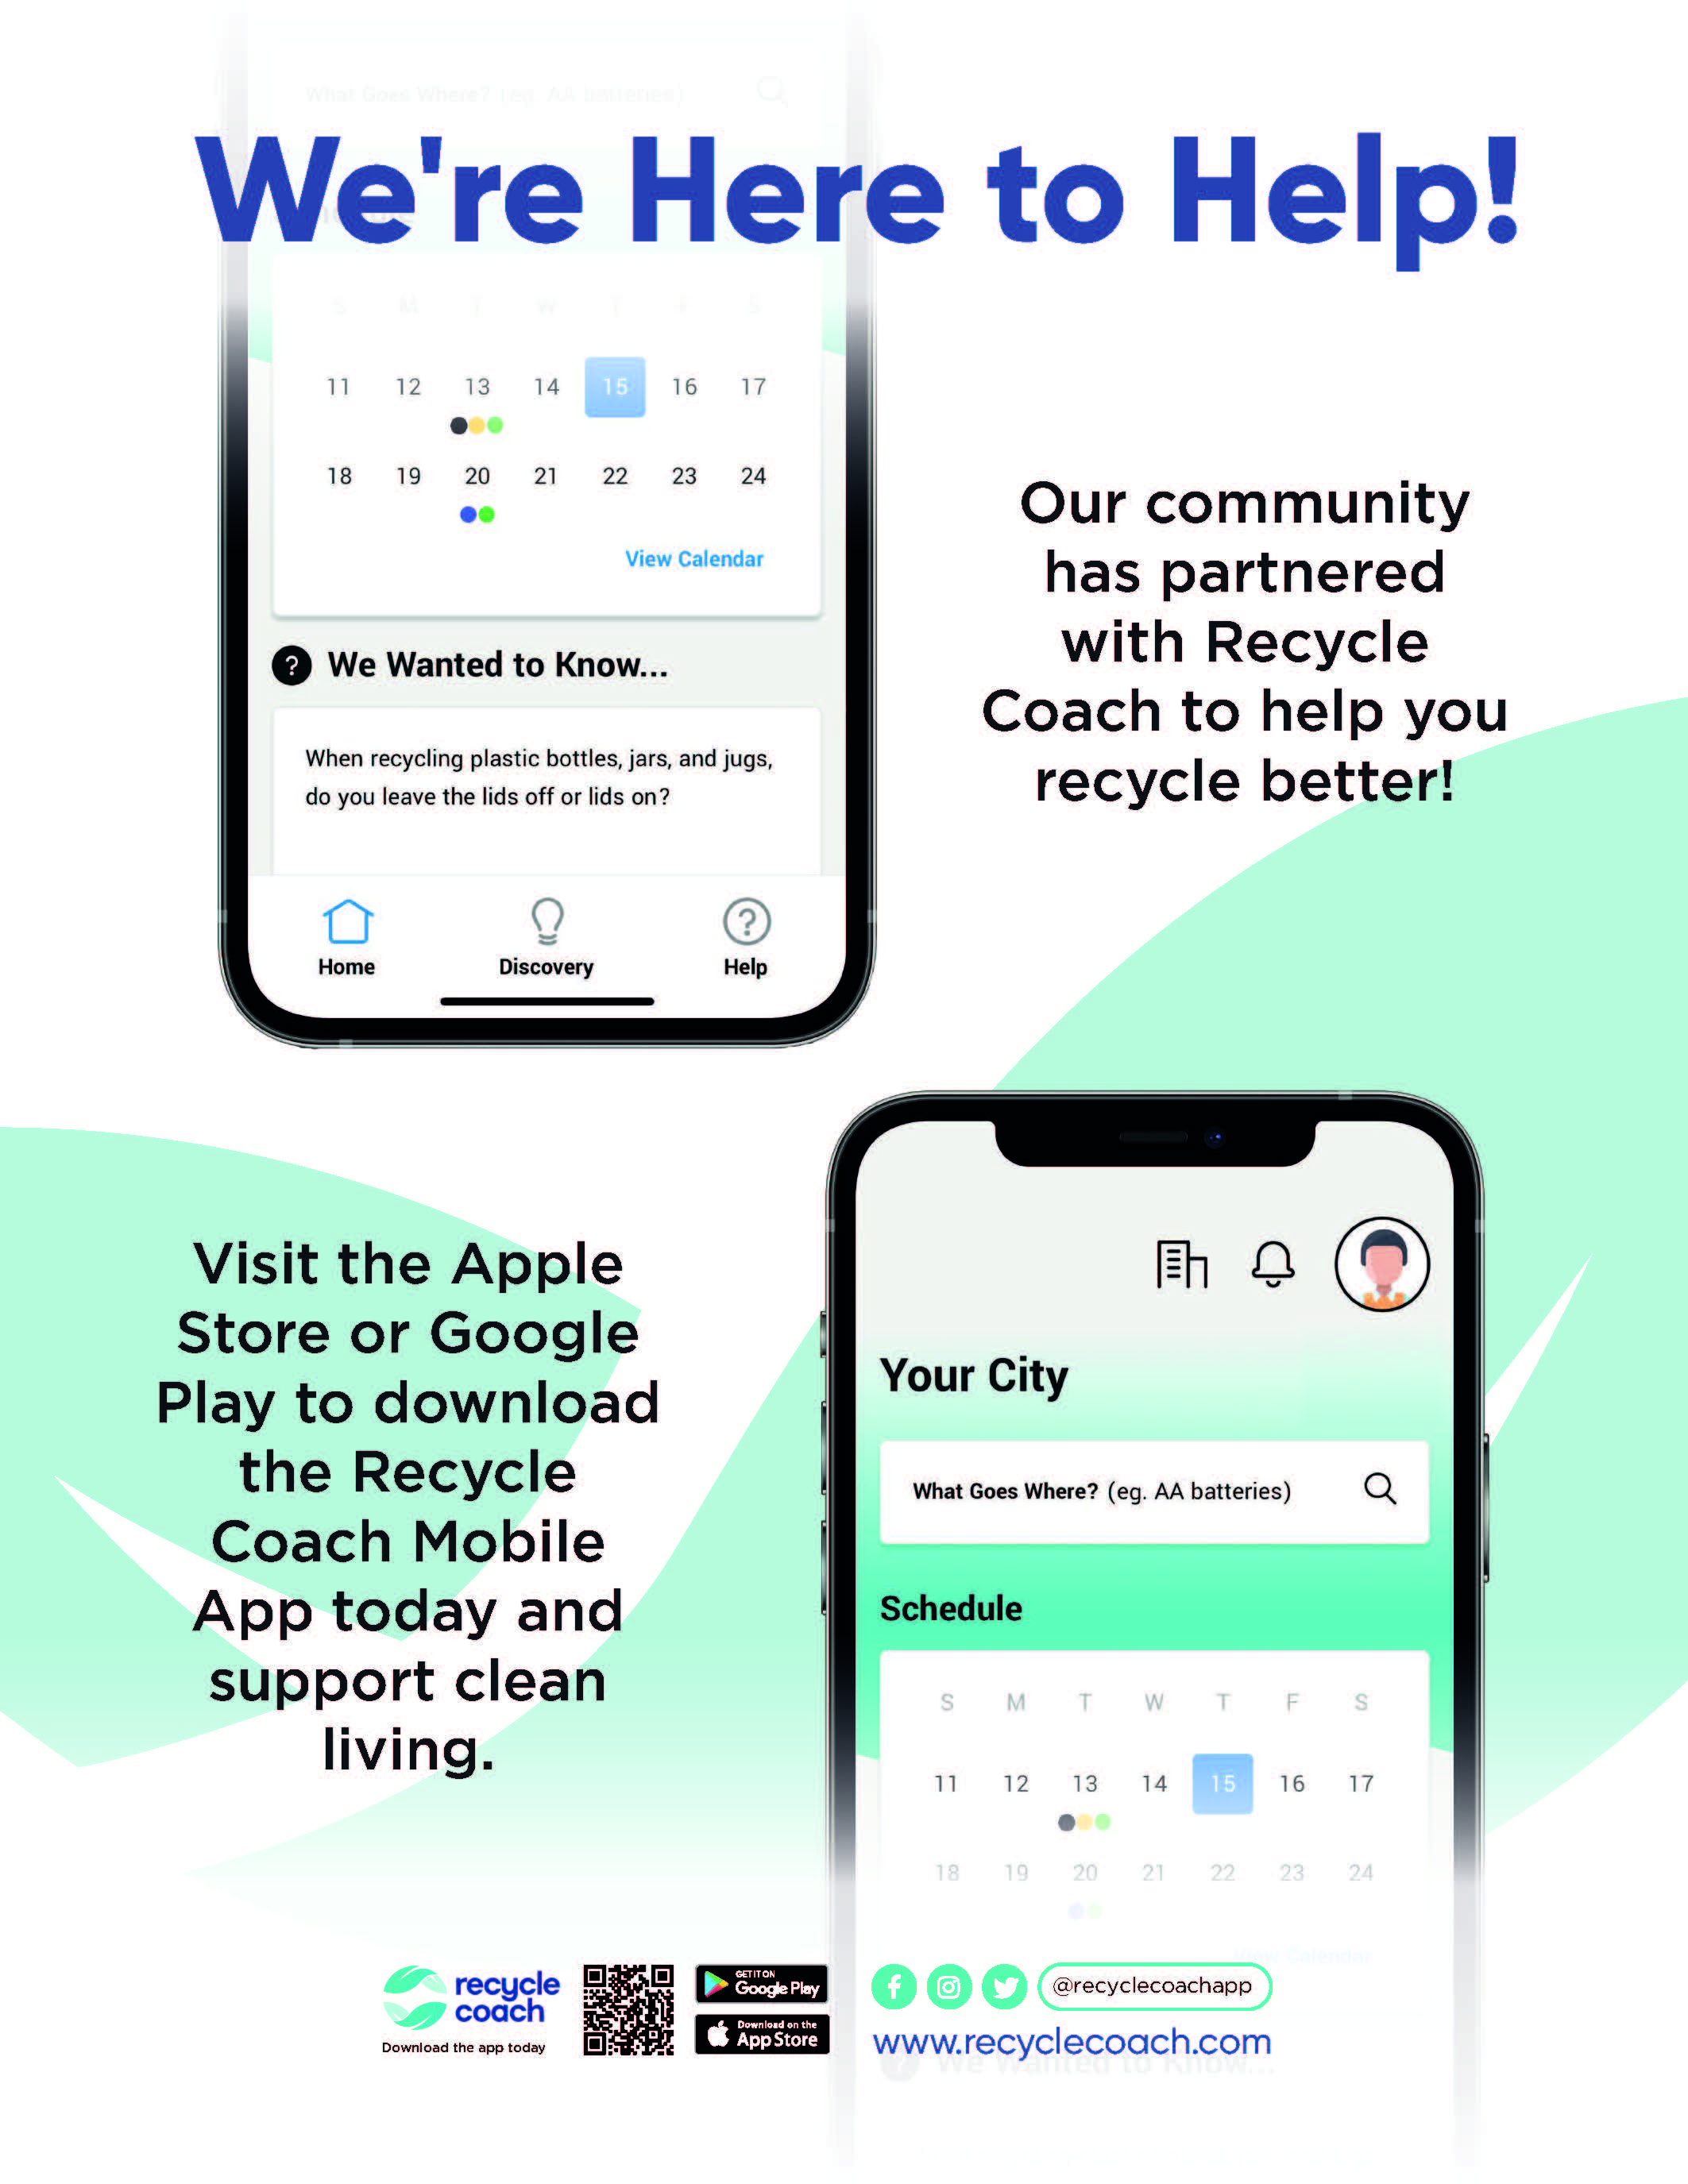 Beaufort County Solid Waste Department Launches New Interactive App to Promote Recycling and Smart Disposal Practices